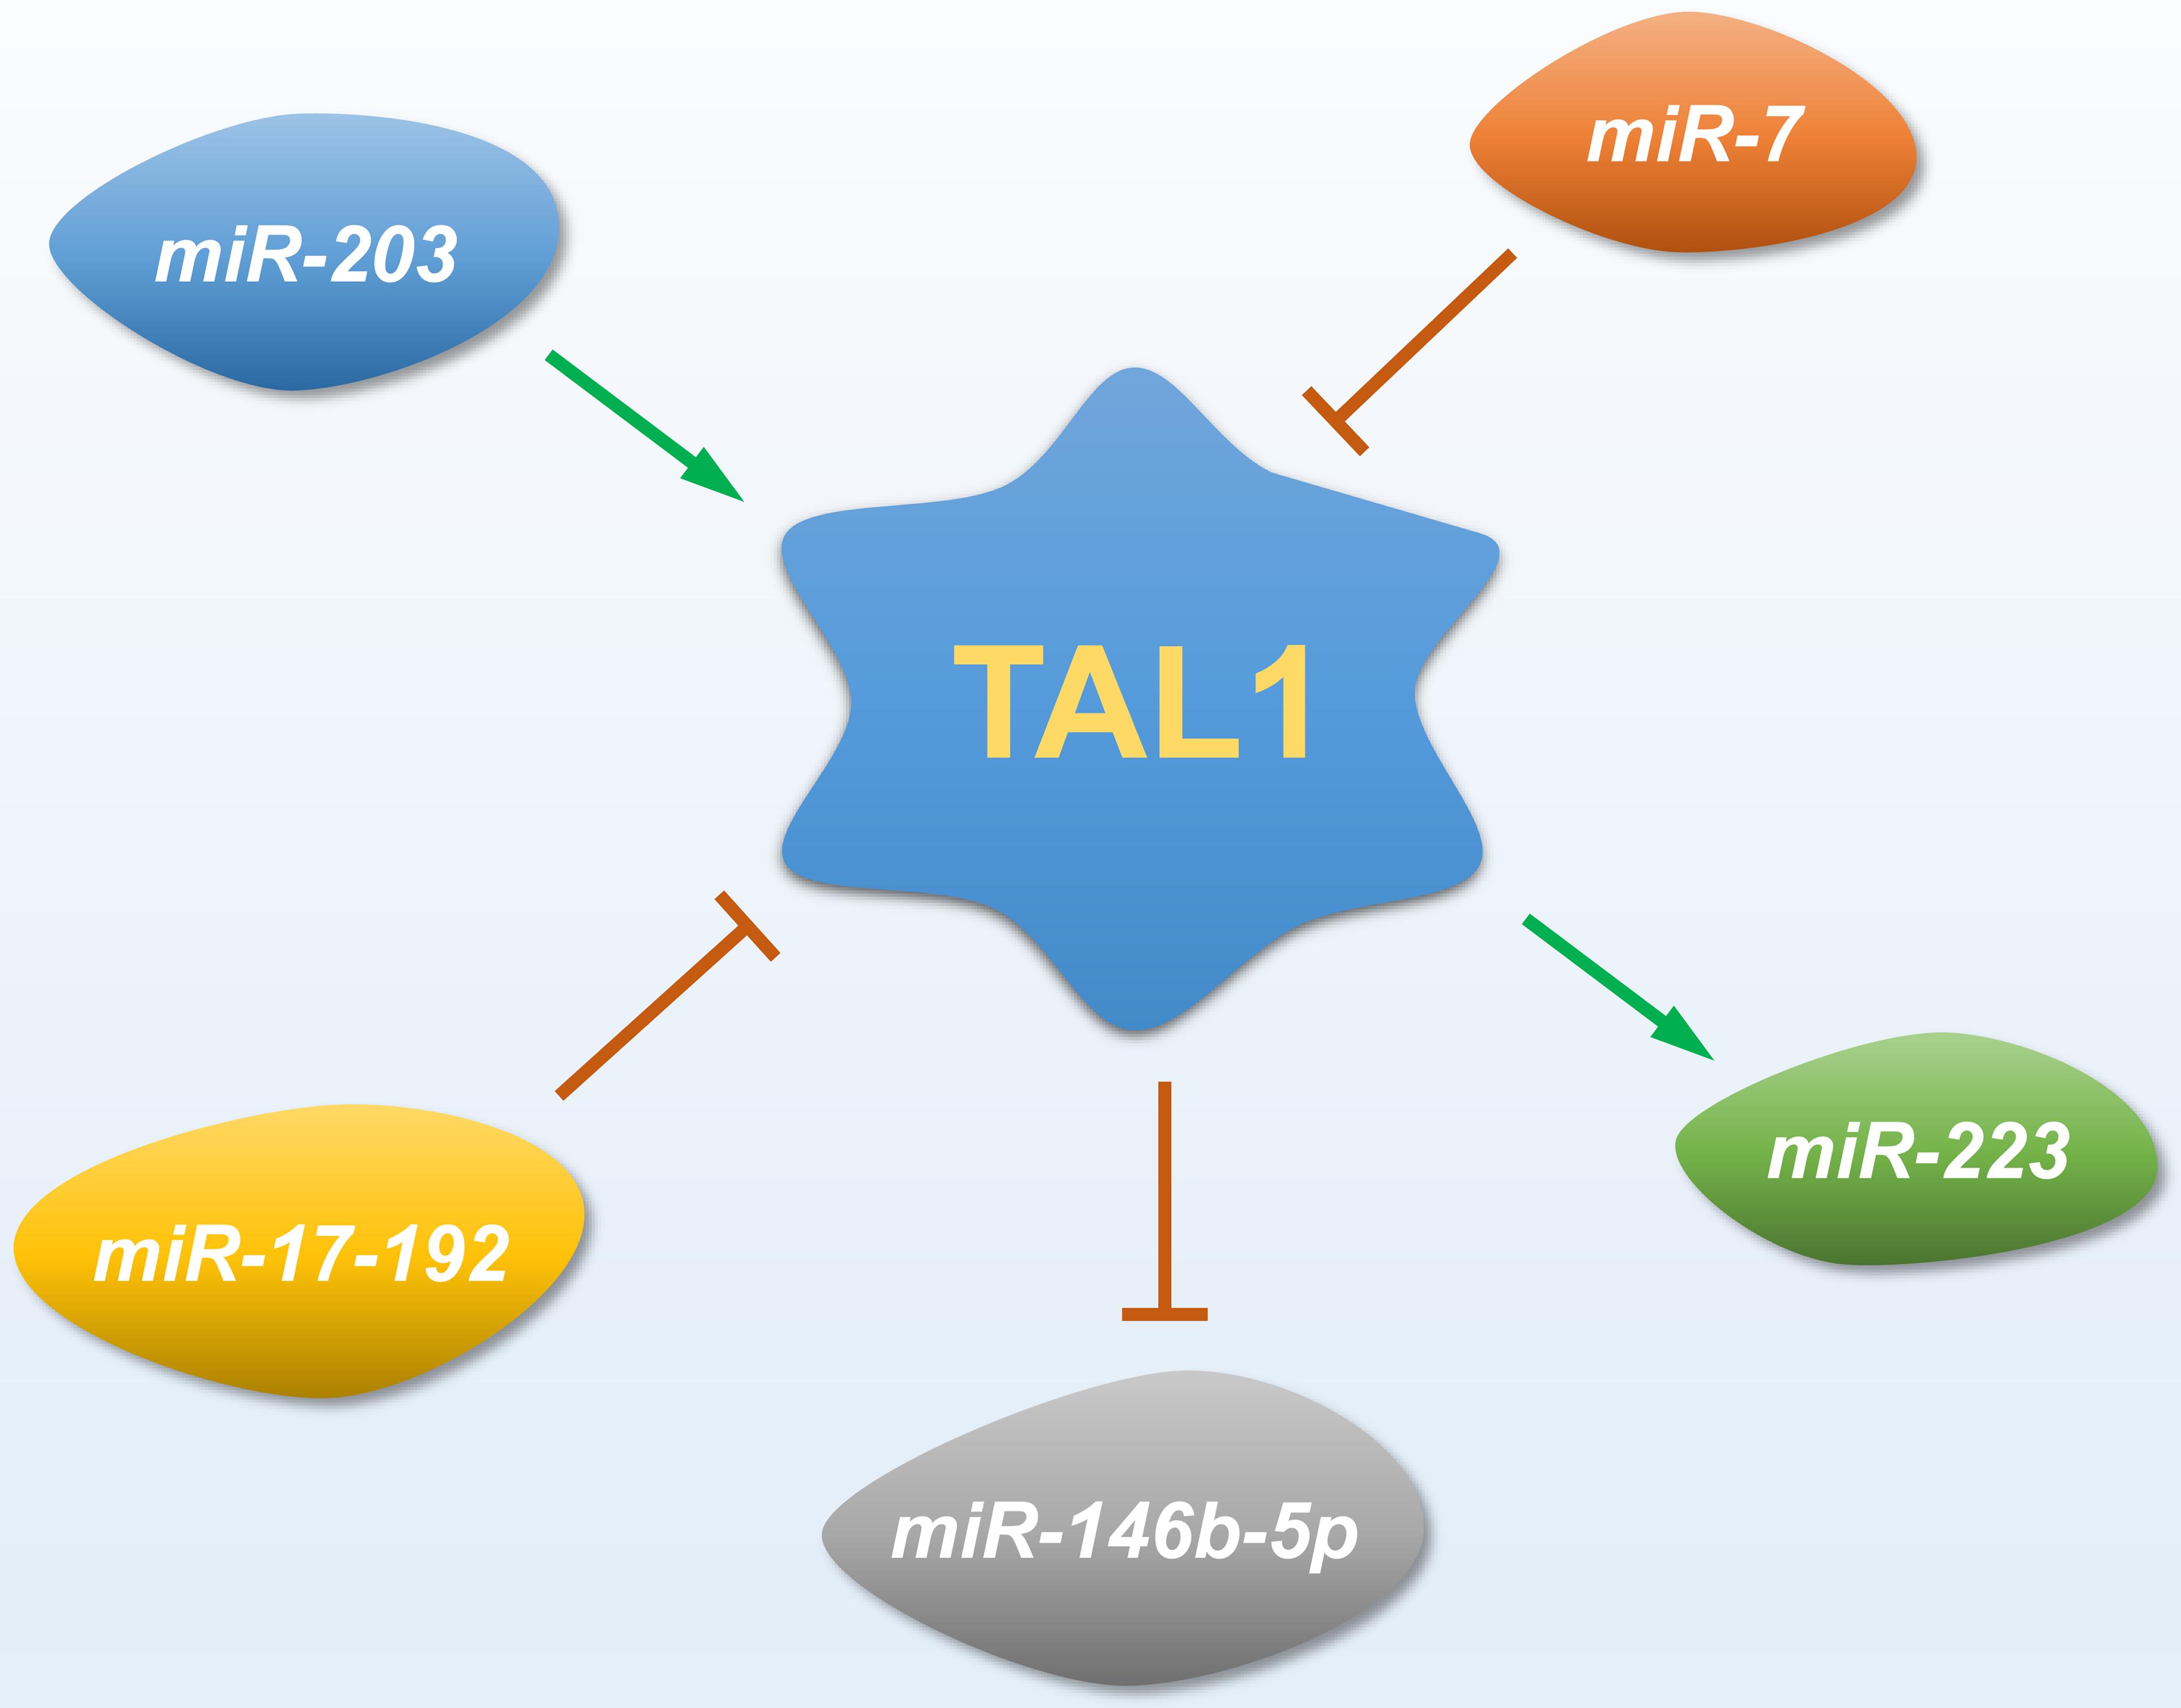 The interaction between TAL-1 and its associated miRNAs follows a unidirectional pattern, in which miRNAs that target TAL-1 are downregulated, resulting in elevated TAL-1 levels.